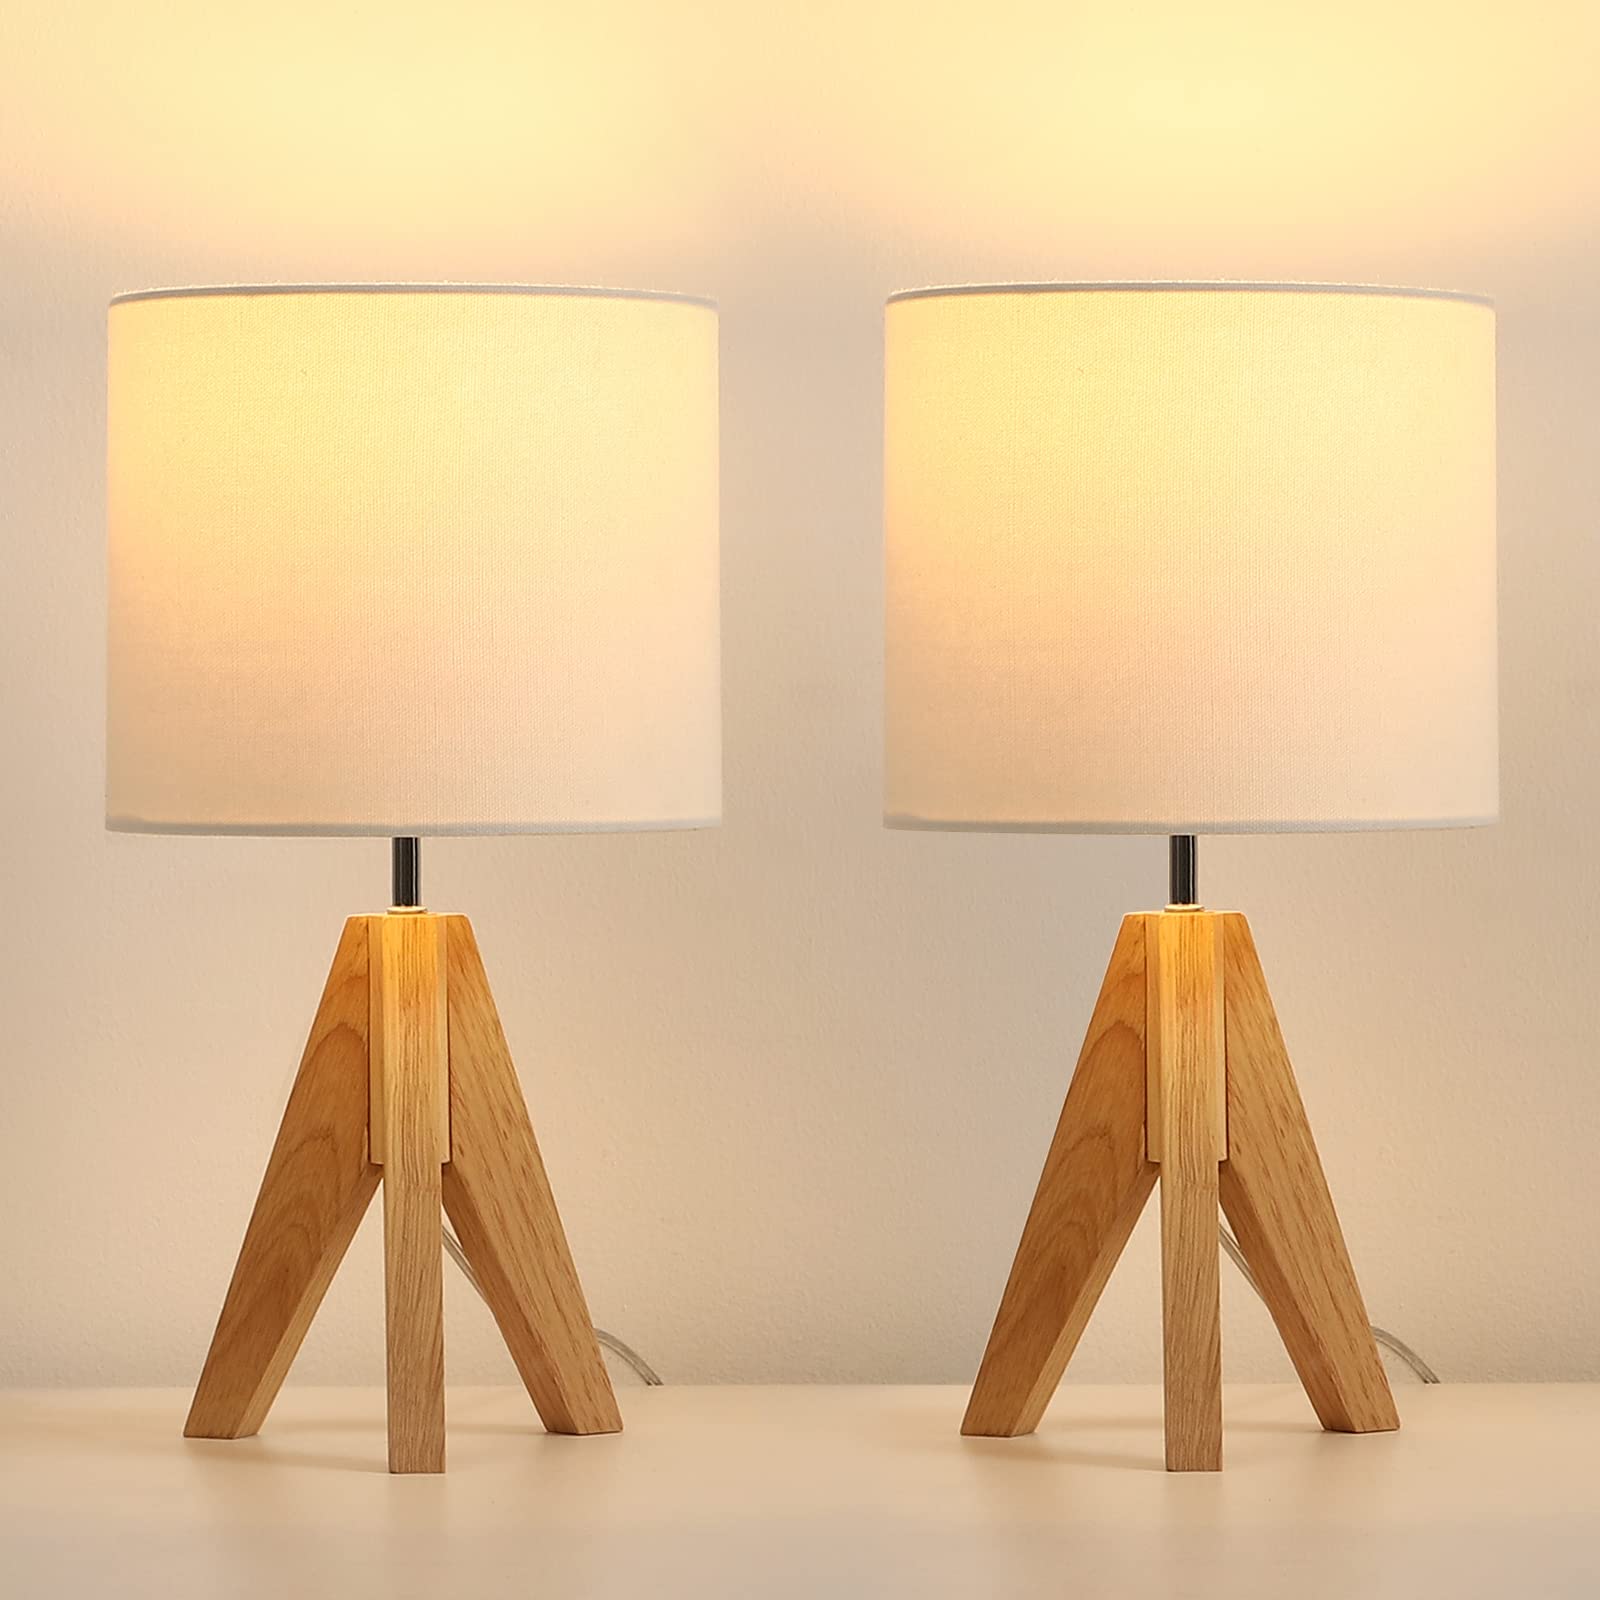 How To Make A Lamp Out Of Wood